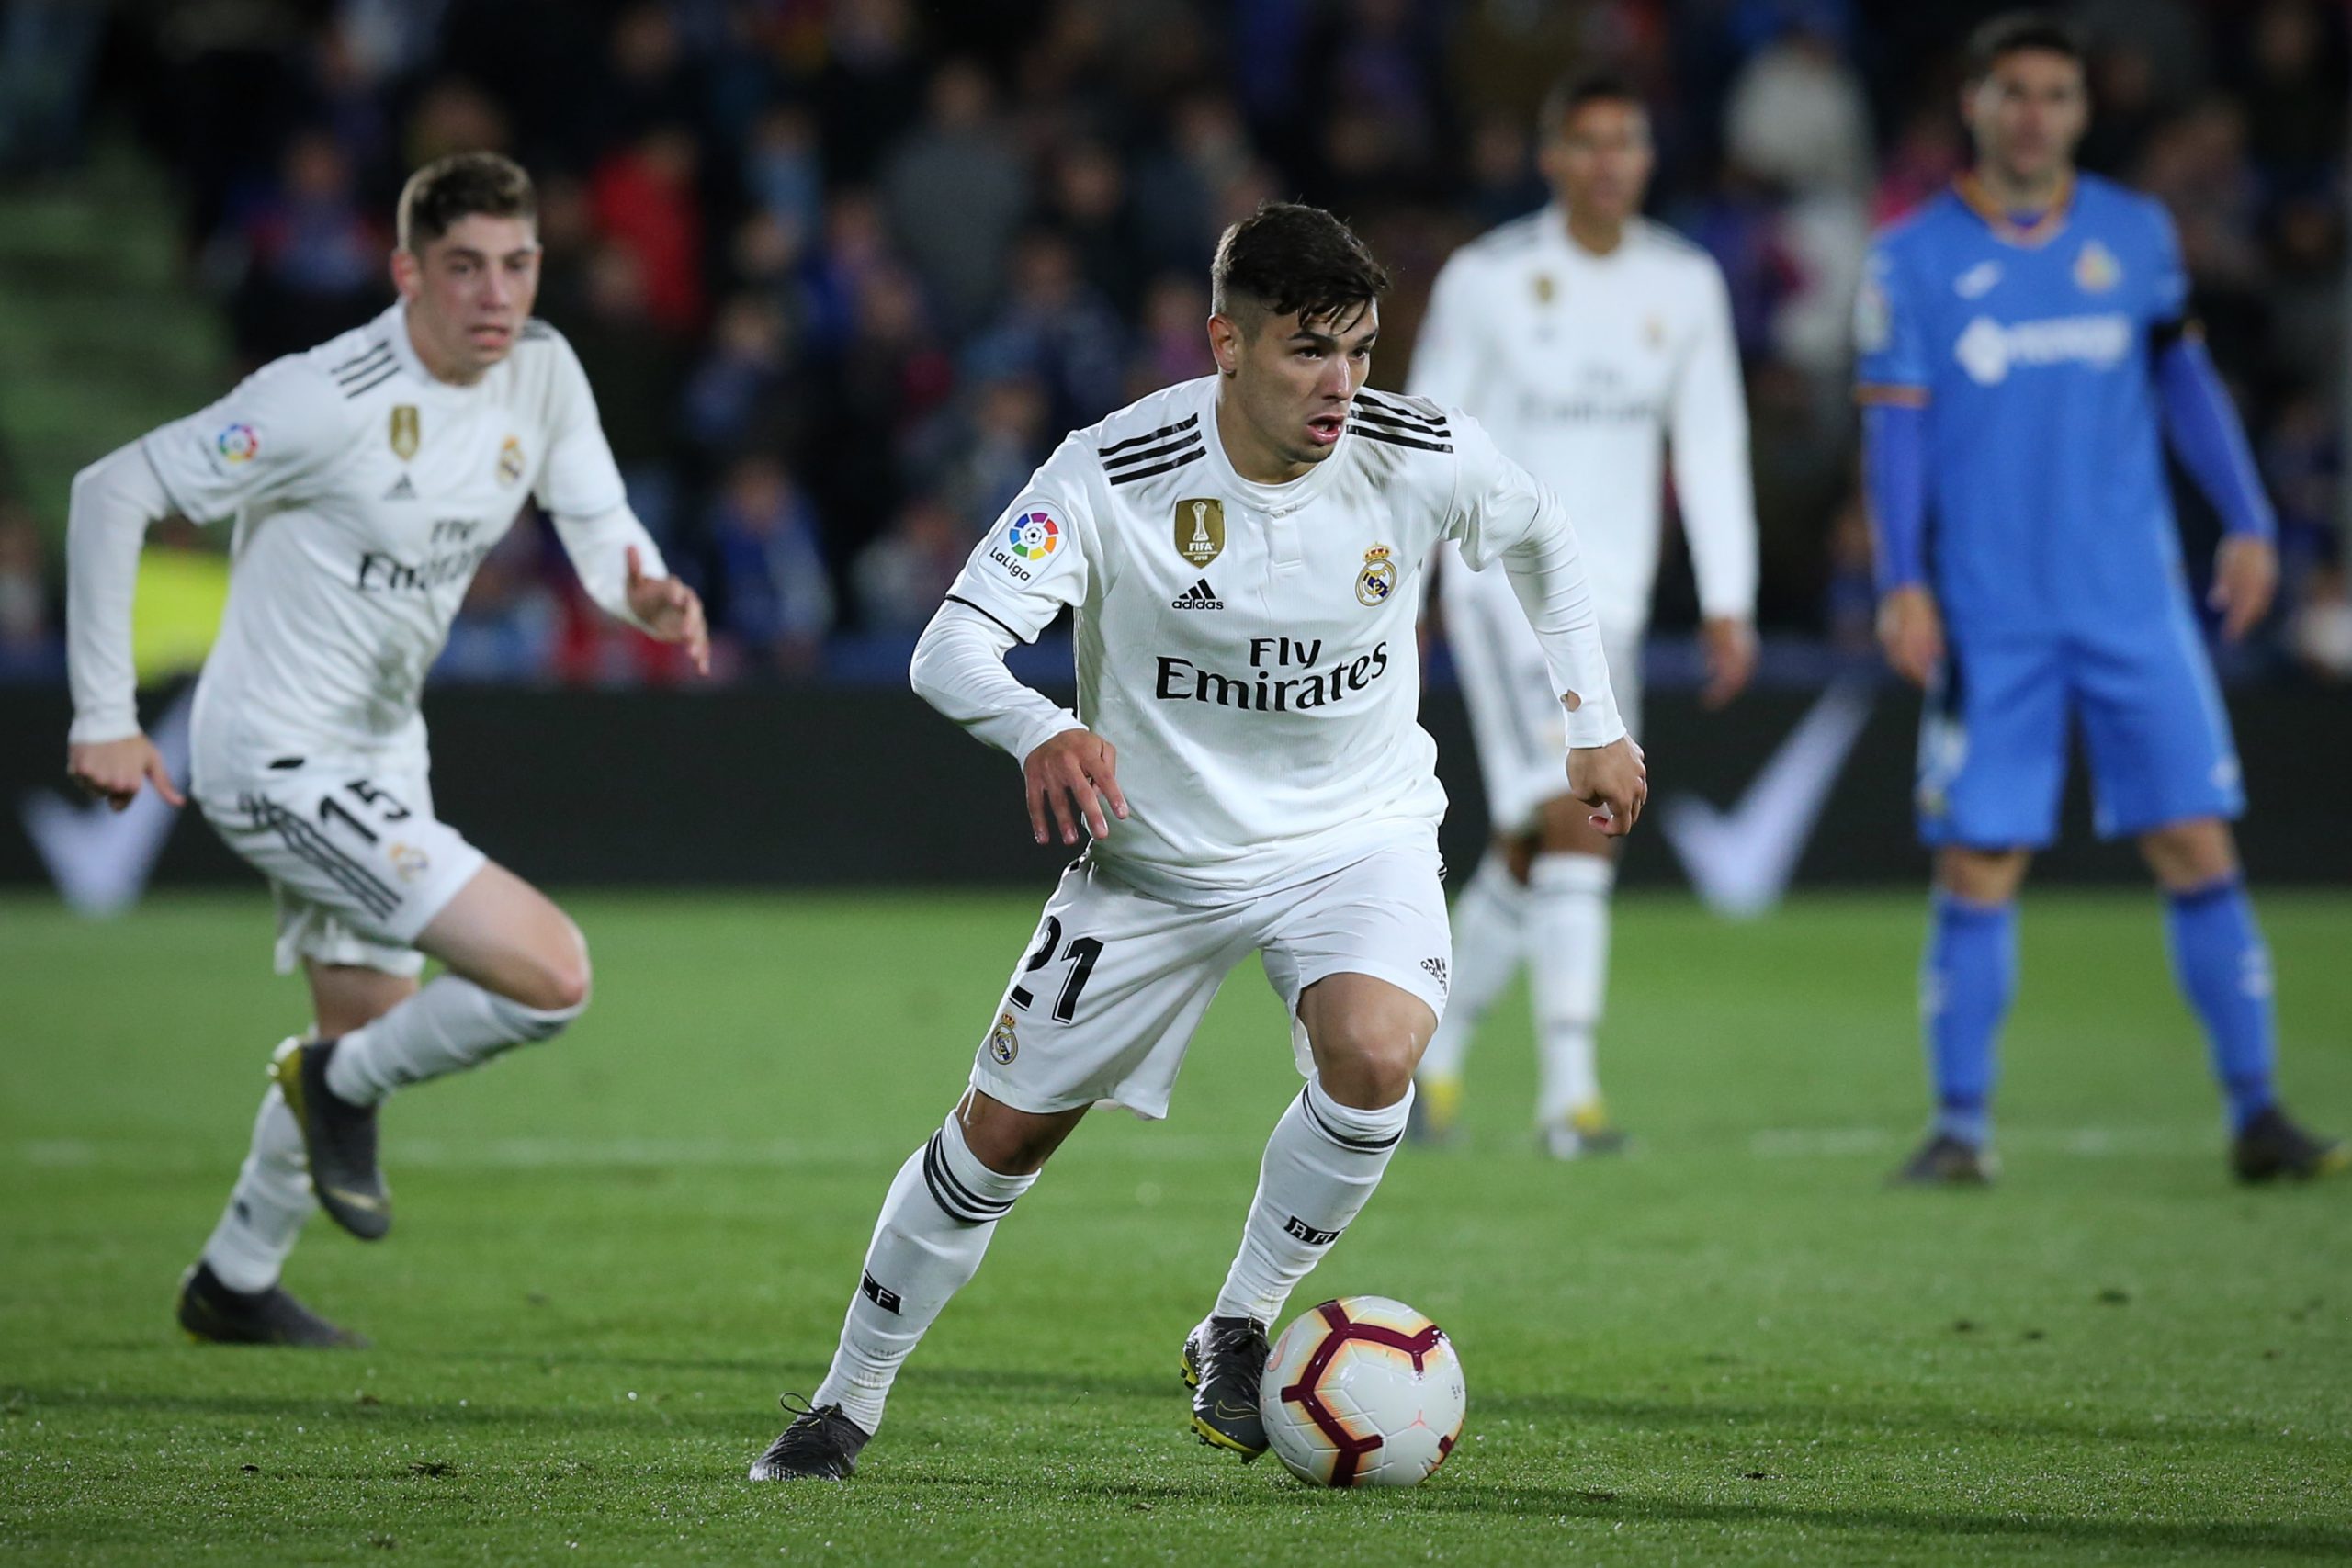 GETAFE, SPAIN - APRIL 25: Brahim Diaz of Real Madrid CF controls the ball during the La Liga match between Getafe CF and Real Madrid CF at Coliseum Alfonso Perez on April 25, 2019 in Getafe, Spain. (Photo by Gonzalo Arroyo Moreno/Getty Images)